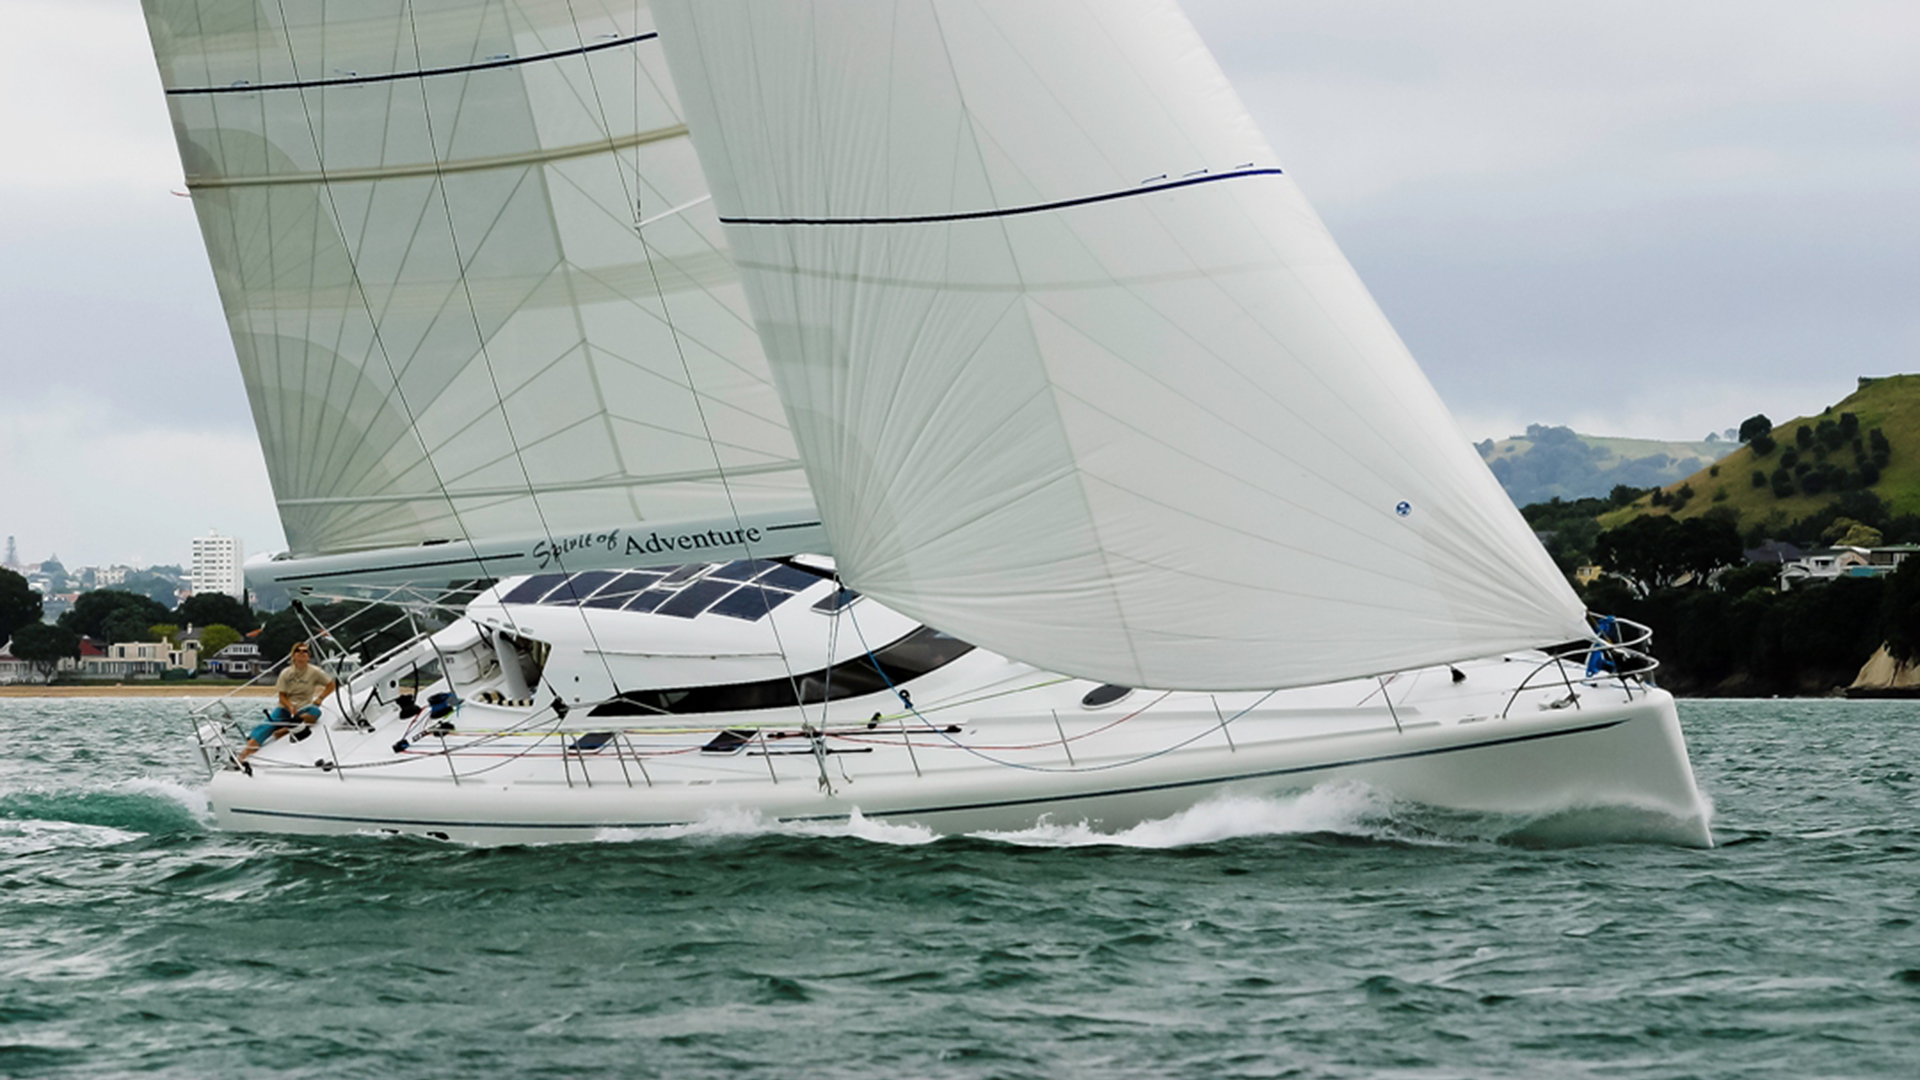 SOA was Owen Clarke Design’s first performance lifting keel blue water custom cruising yacht design. She was built at Marten Yachts in New Zealand, in pre-preg carbon Nomex composite. OC were both the yacht’s designers and project managers of this modern sailboat design